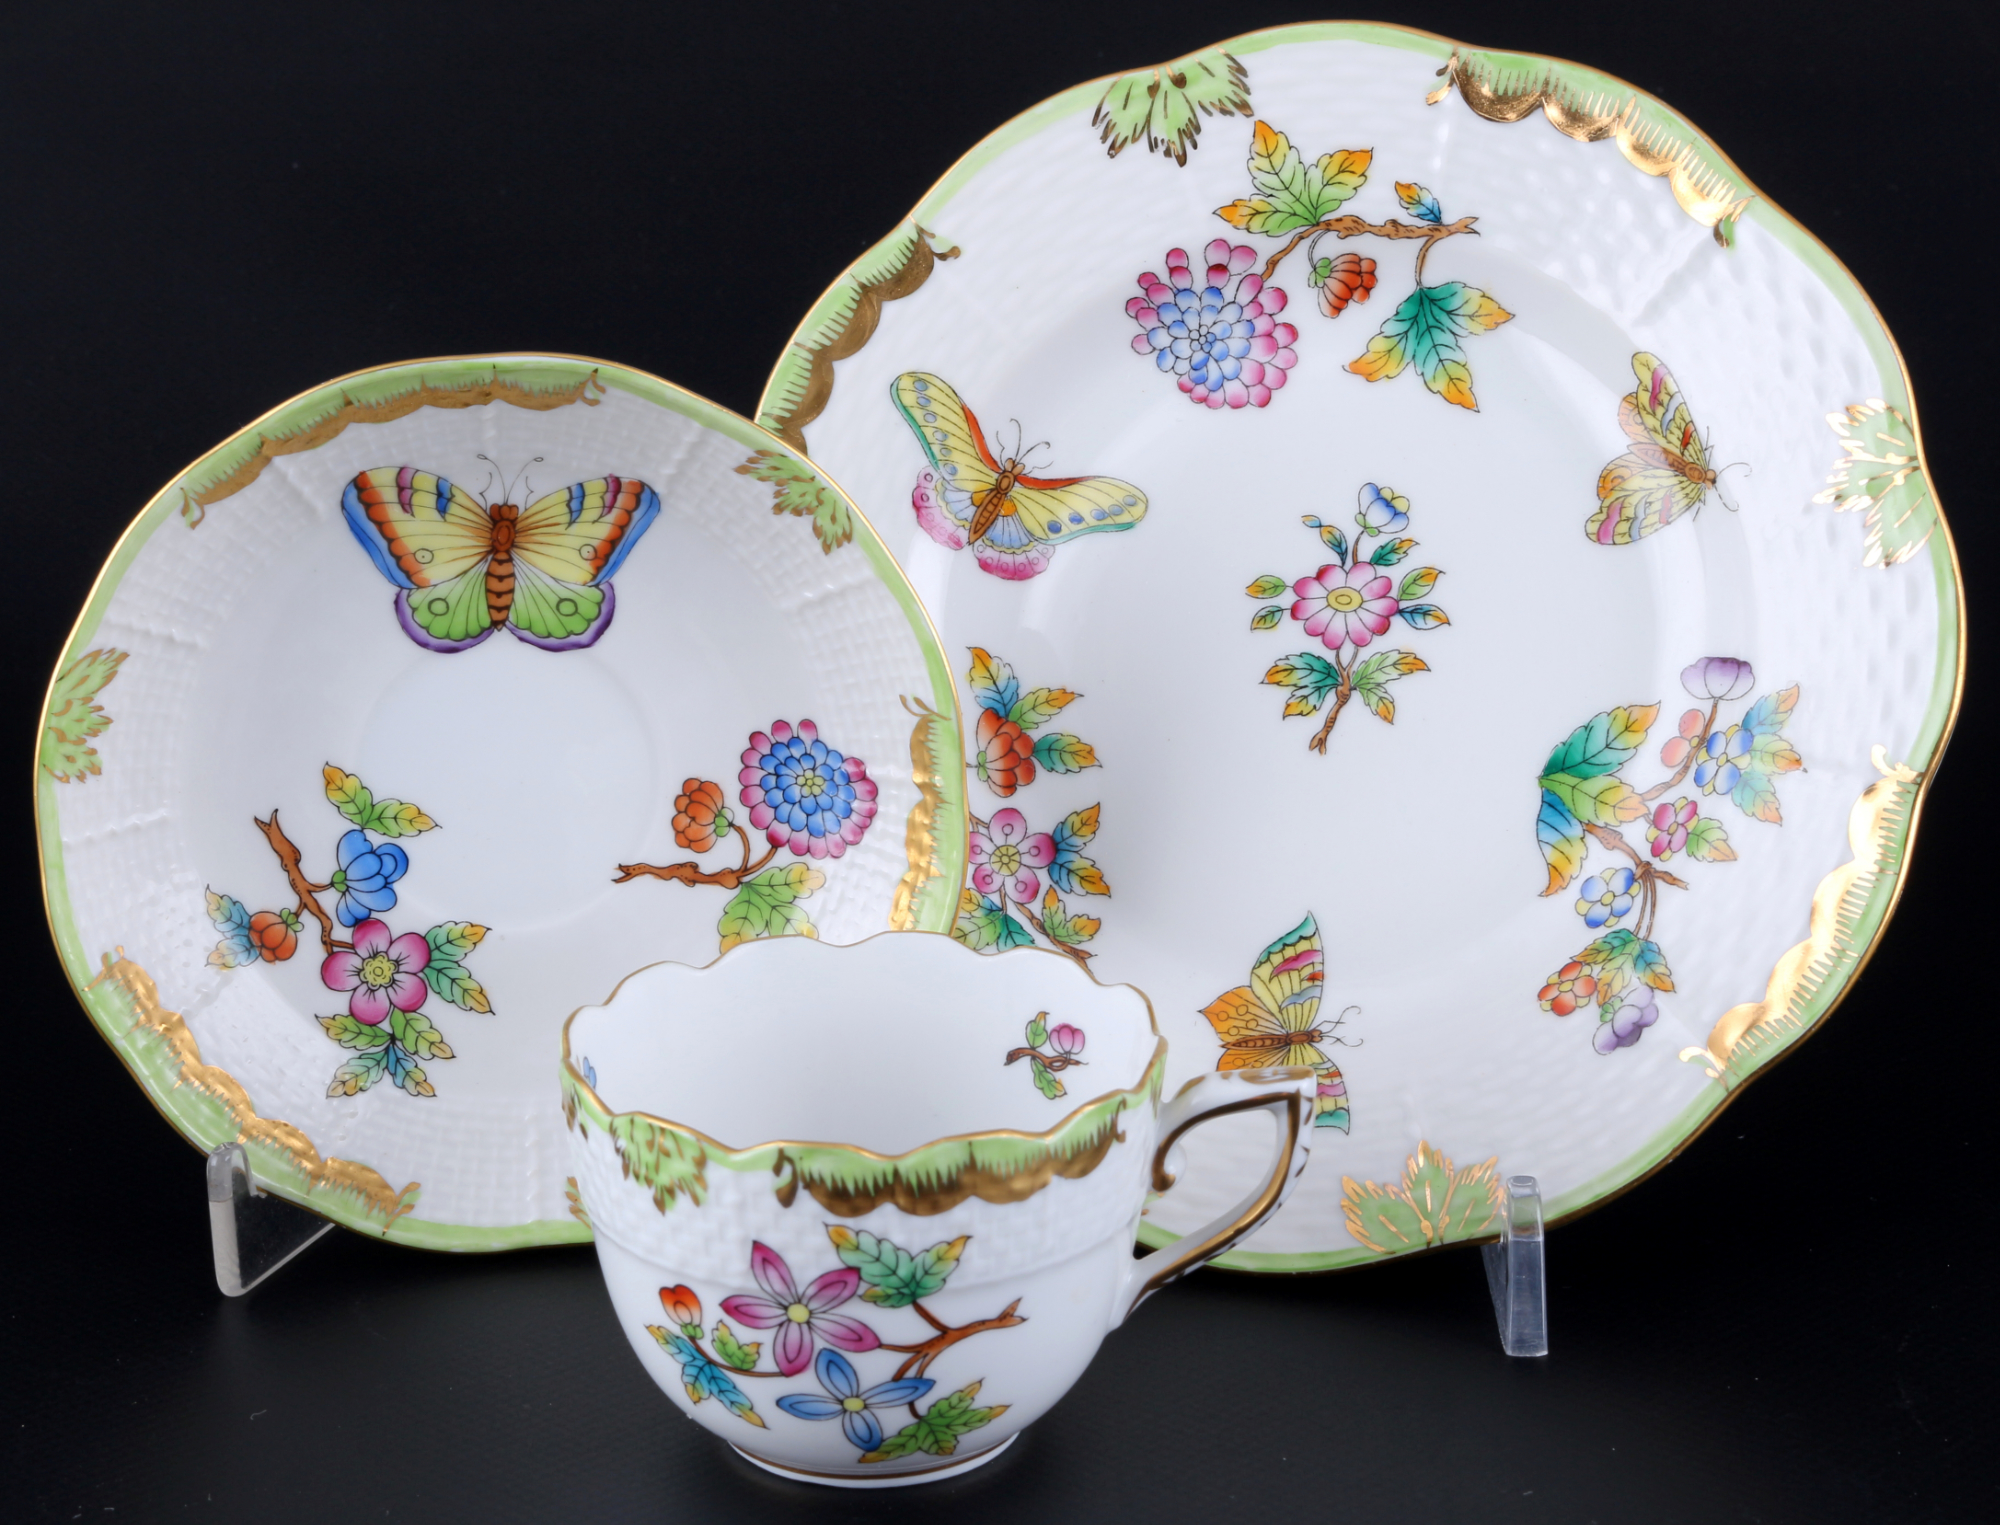 Herend VBO Queen Victoria 4 Mokkagedecke, mocha coffee cups with saucers and dessert plates, - Image 2 of 6